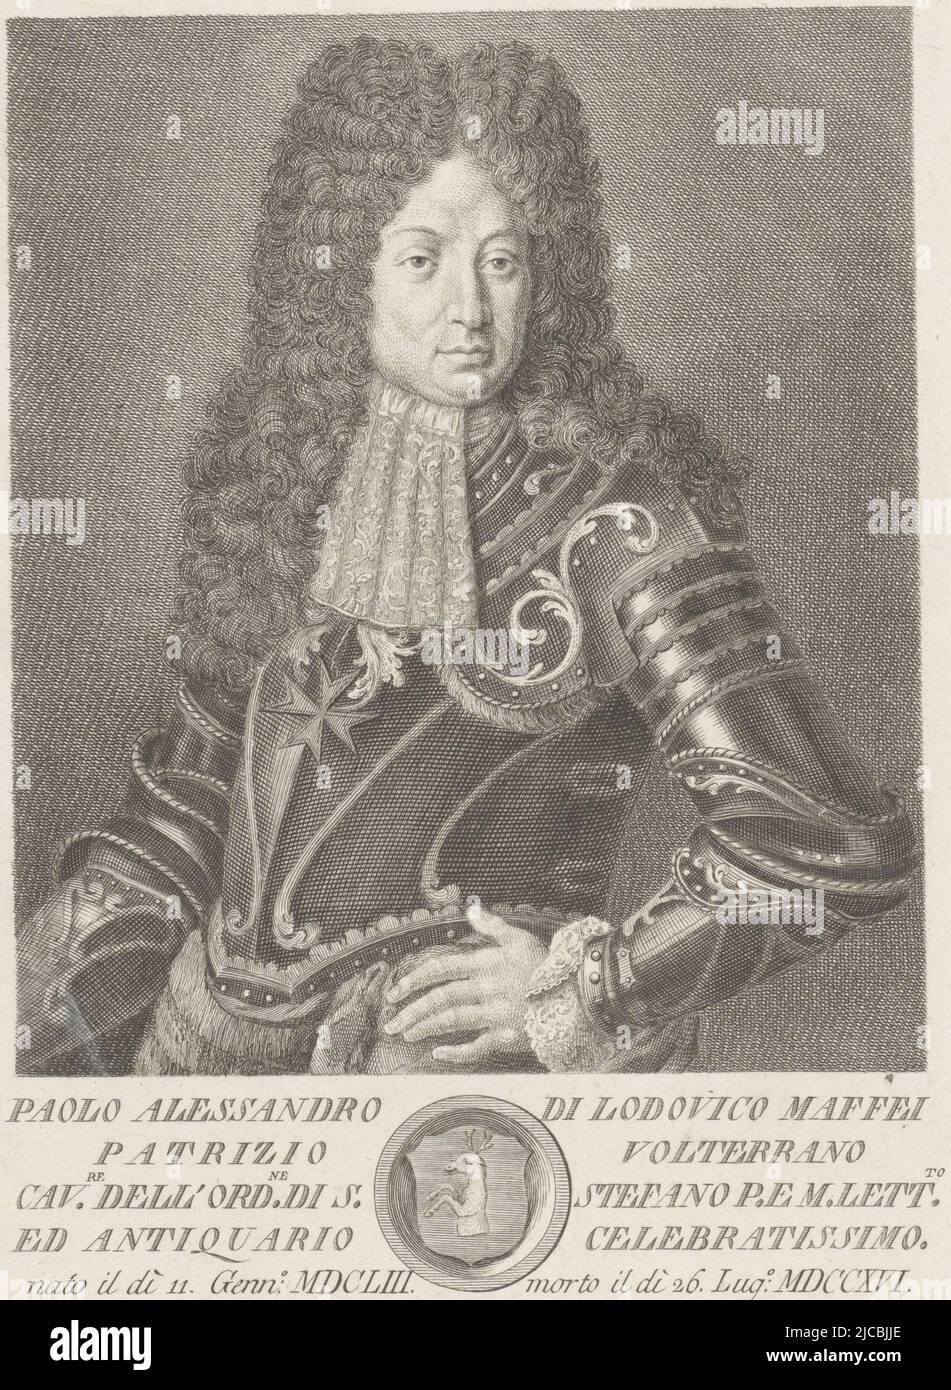 Portrait of Paolo Alessandro Maffei, with his hand at his side Below the portrait a text in Italian and a coat of arms in a circular frame, Portrait of Paolo Alessandro Maffei Portraits of famous Italians with coat of arms in lower margin , print maker: Francesco Allegrini, (mentioned on object), intermediary draughtsman: F. Forzoni, (mentioned on object), Italy, 1769, paper, engraving, h 297 mm × w 201 mm Stock Photo